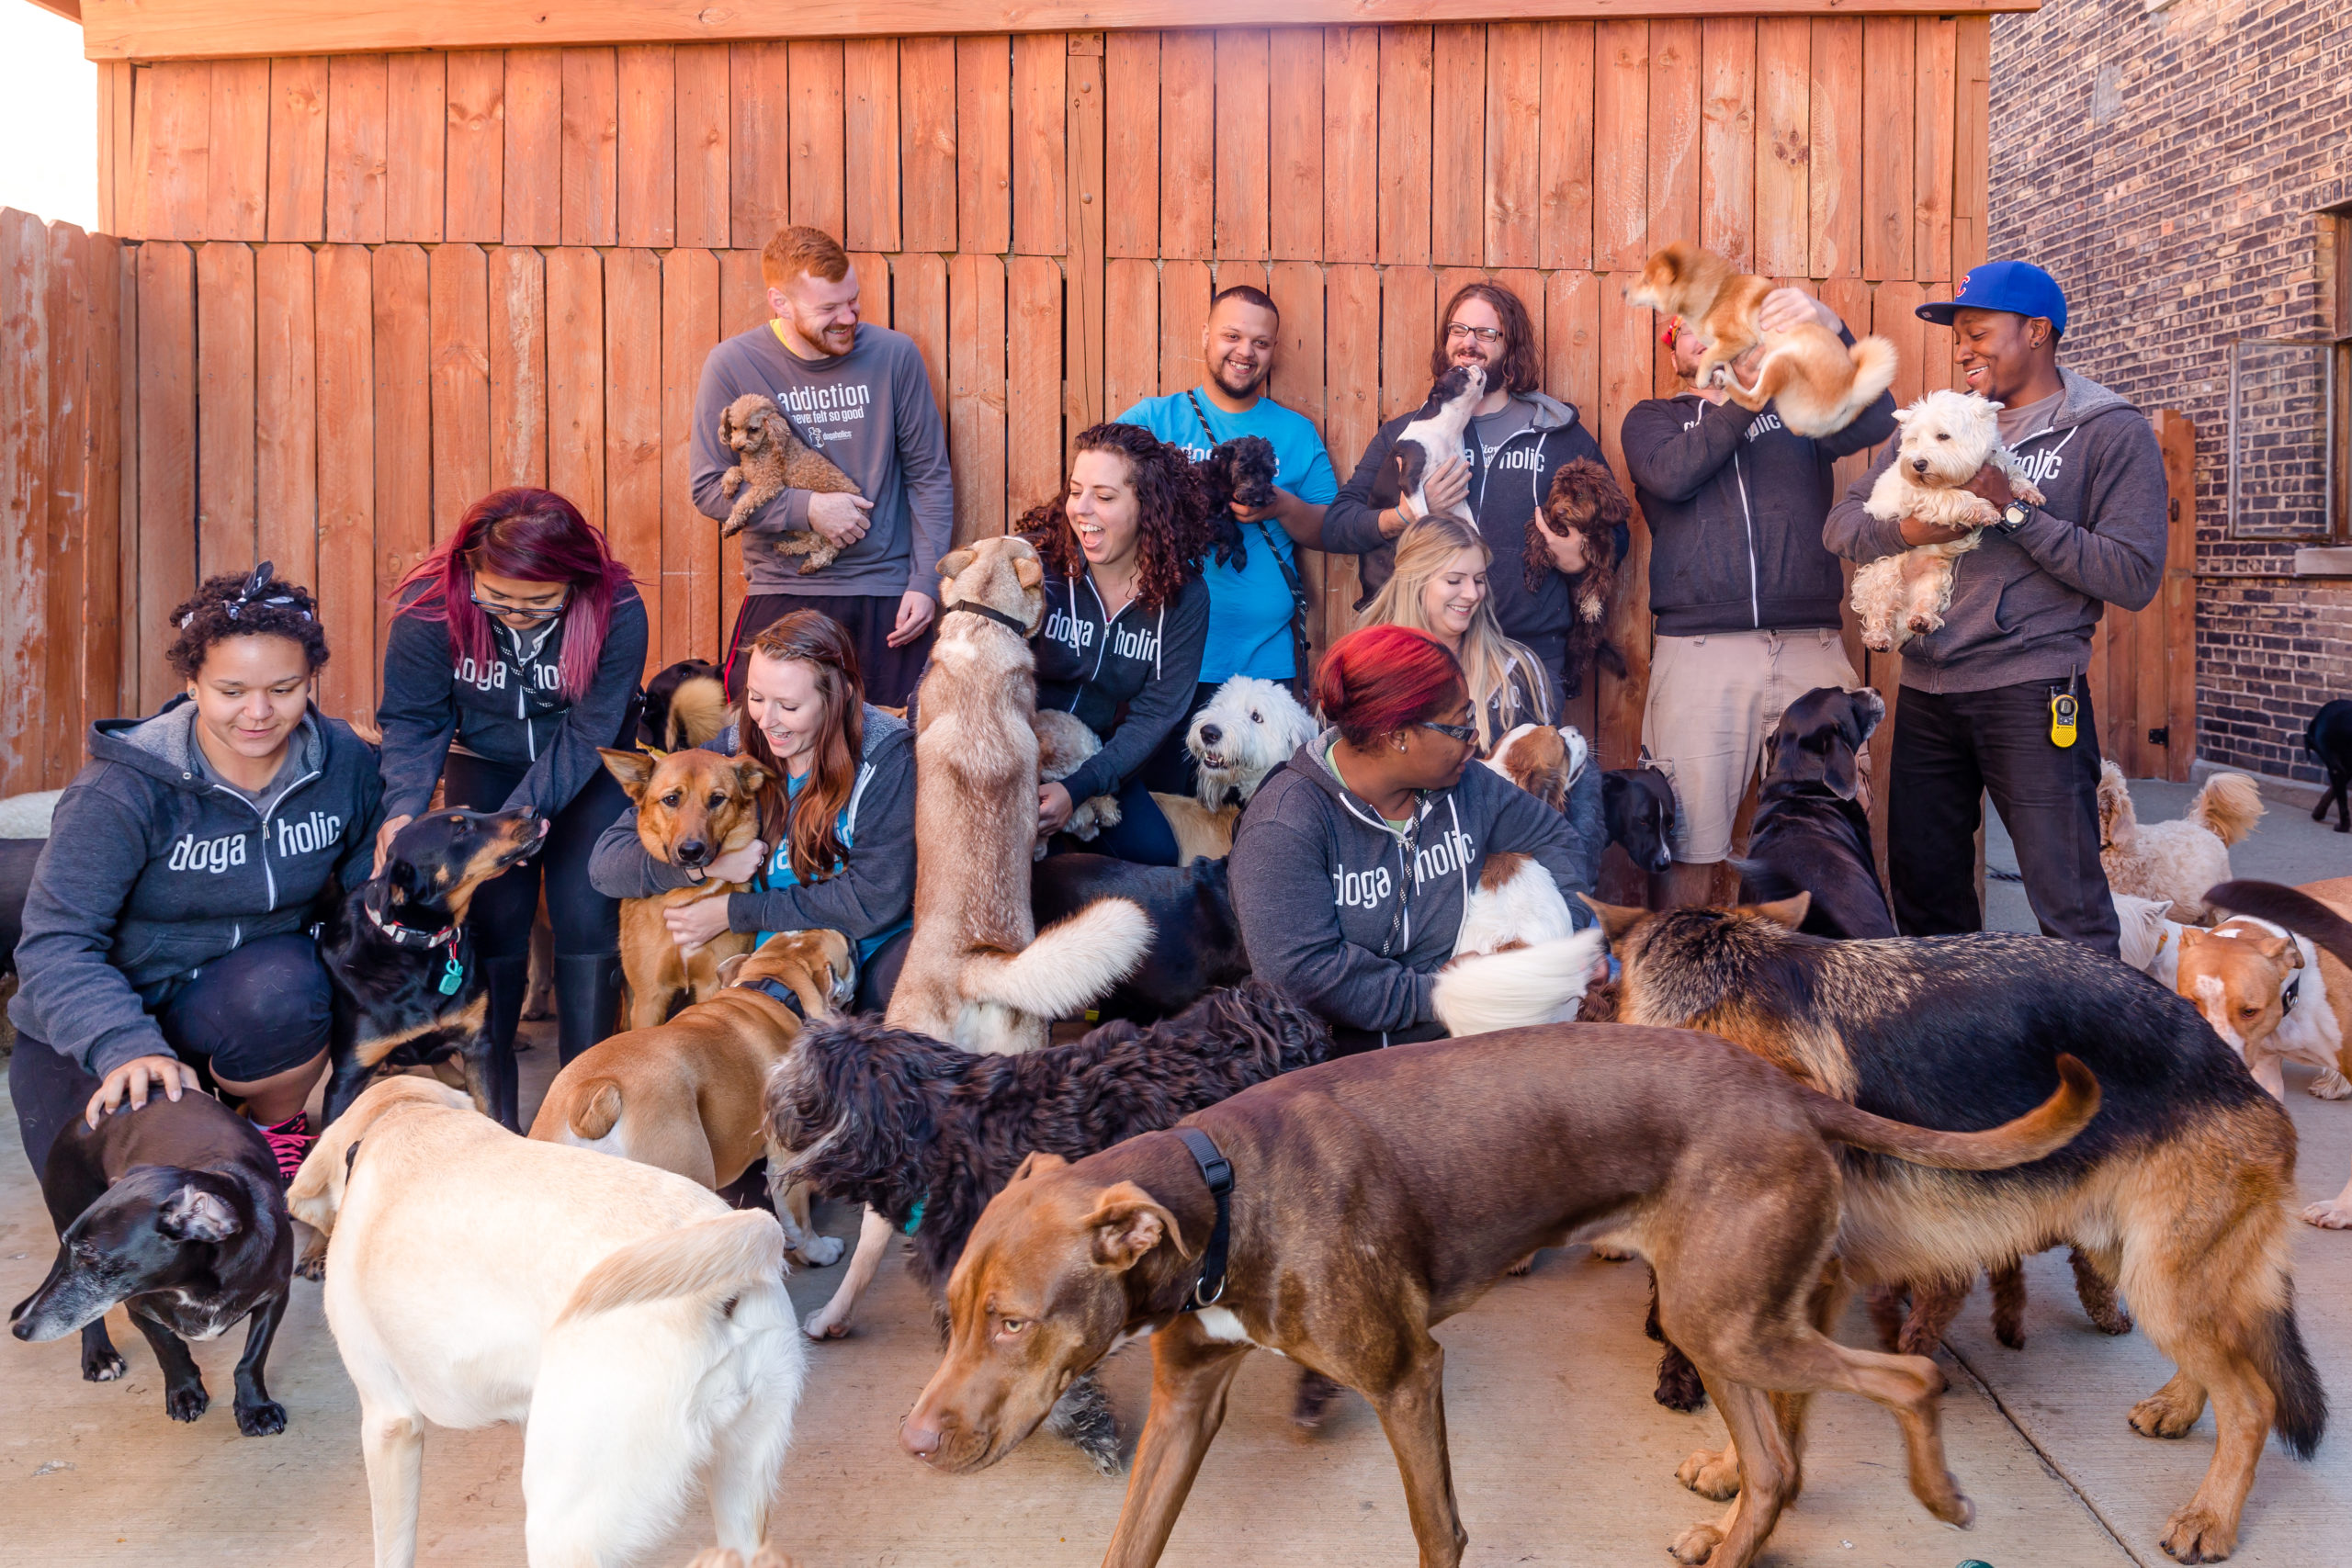 Group of people and dogs all standing together for a photo